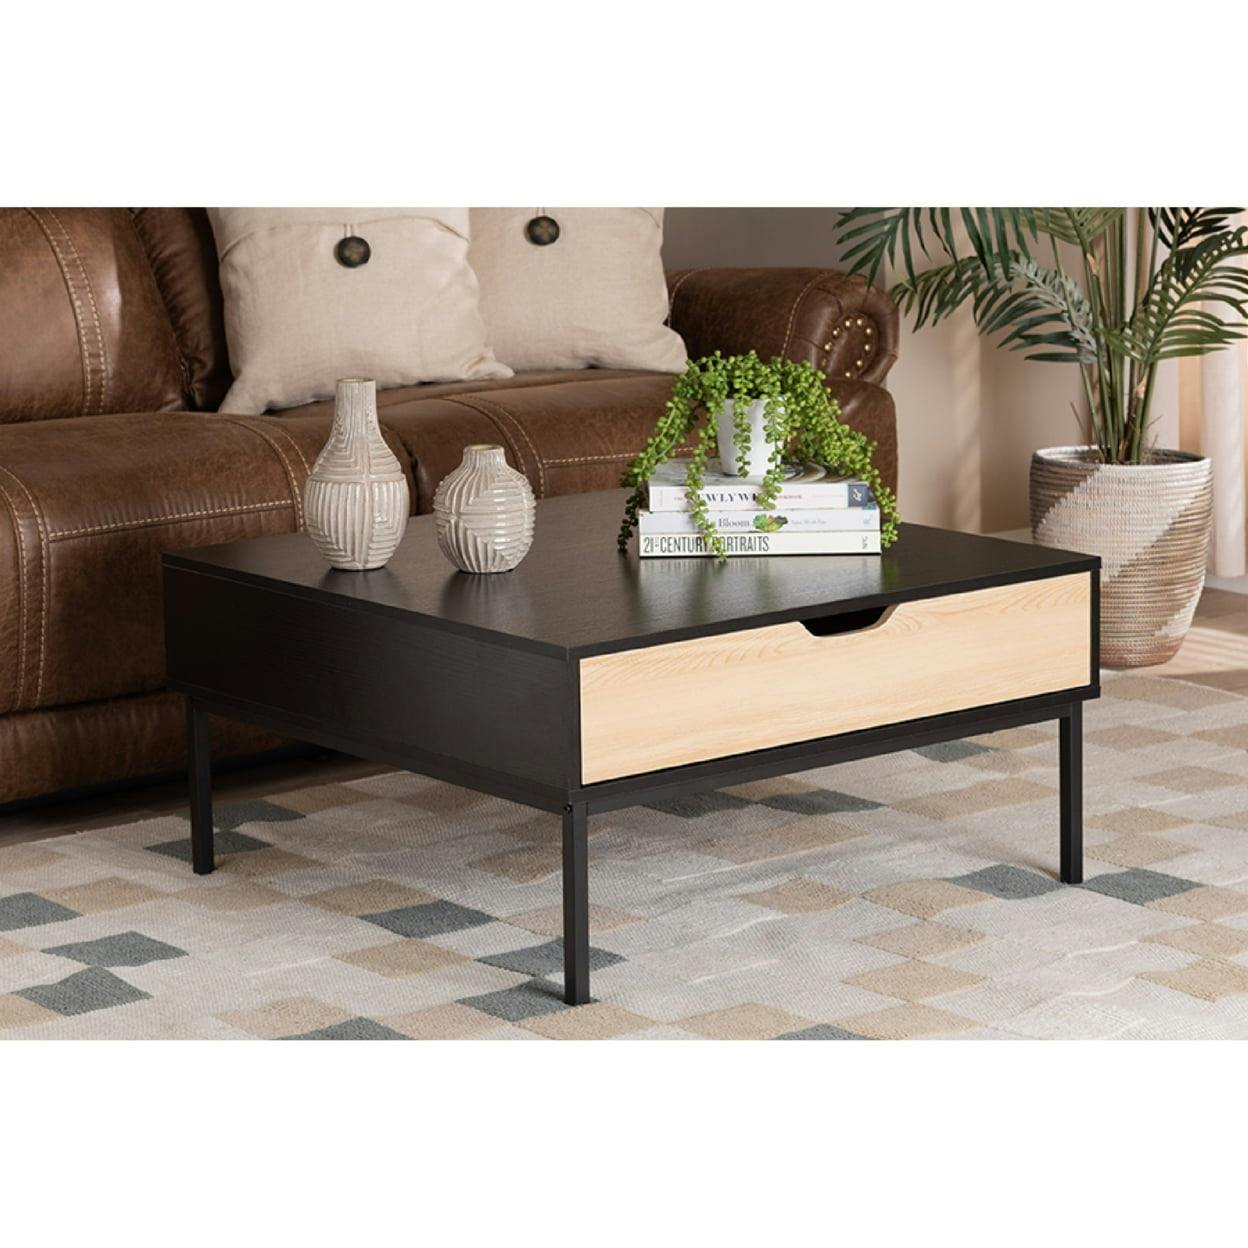 Sleek Two-Tone Oak and Black Square Coffee Table with Storage